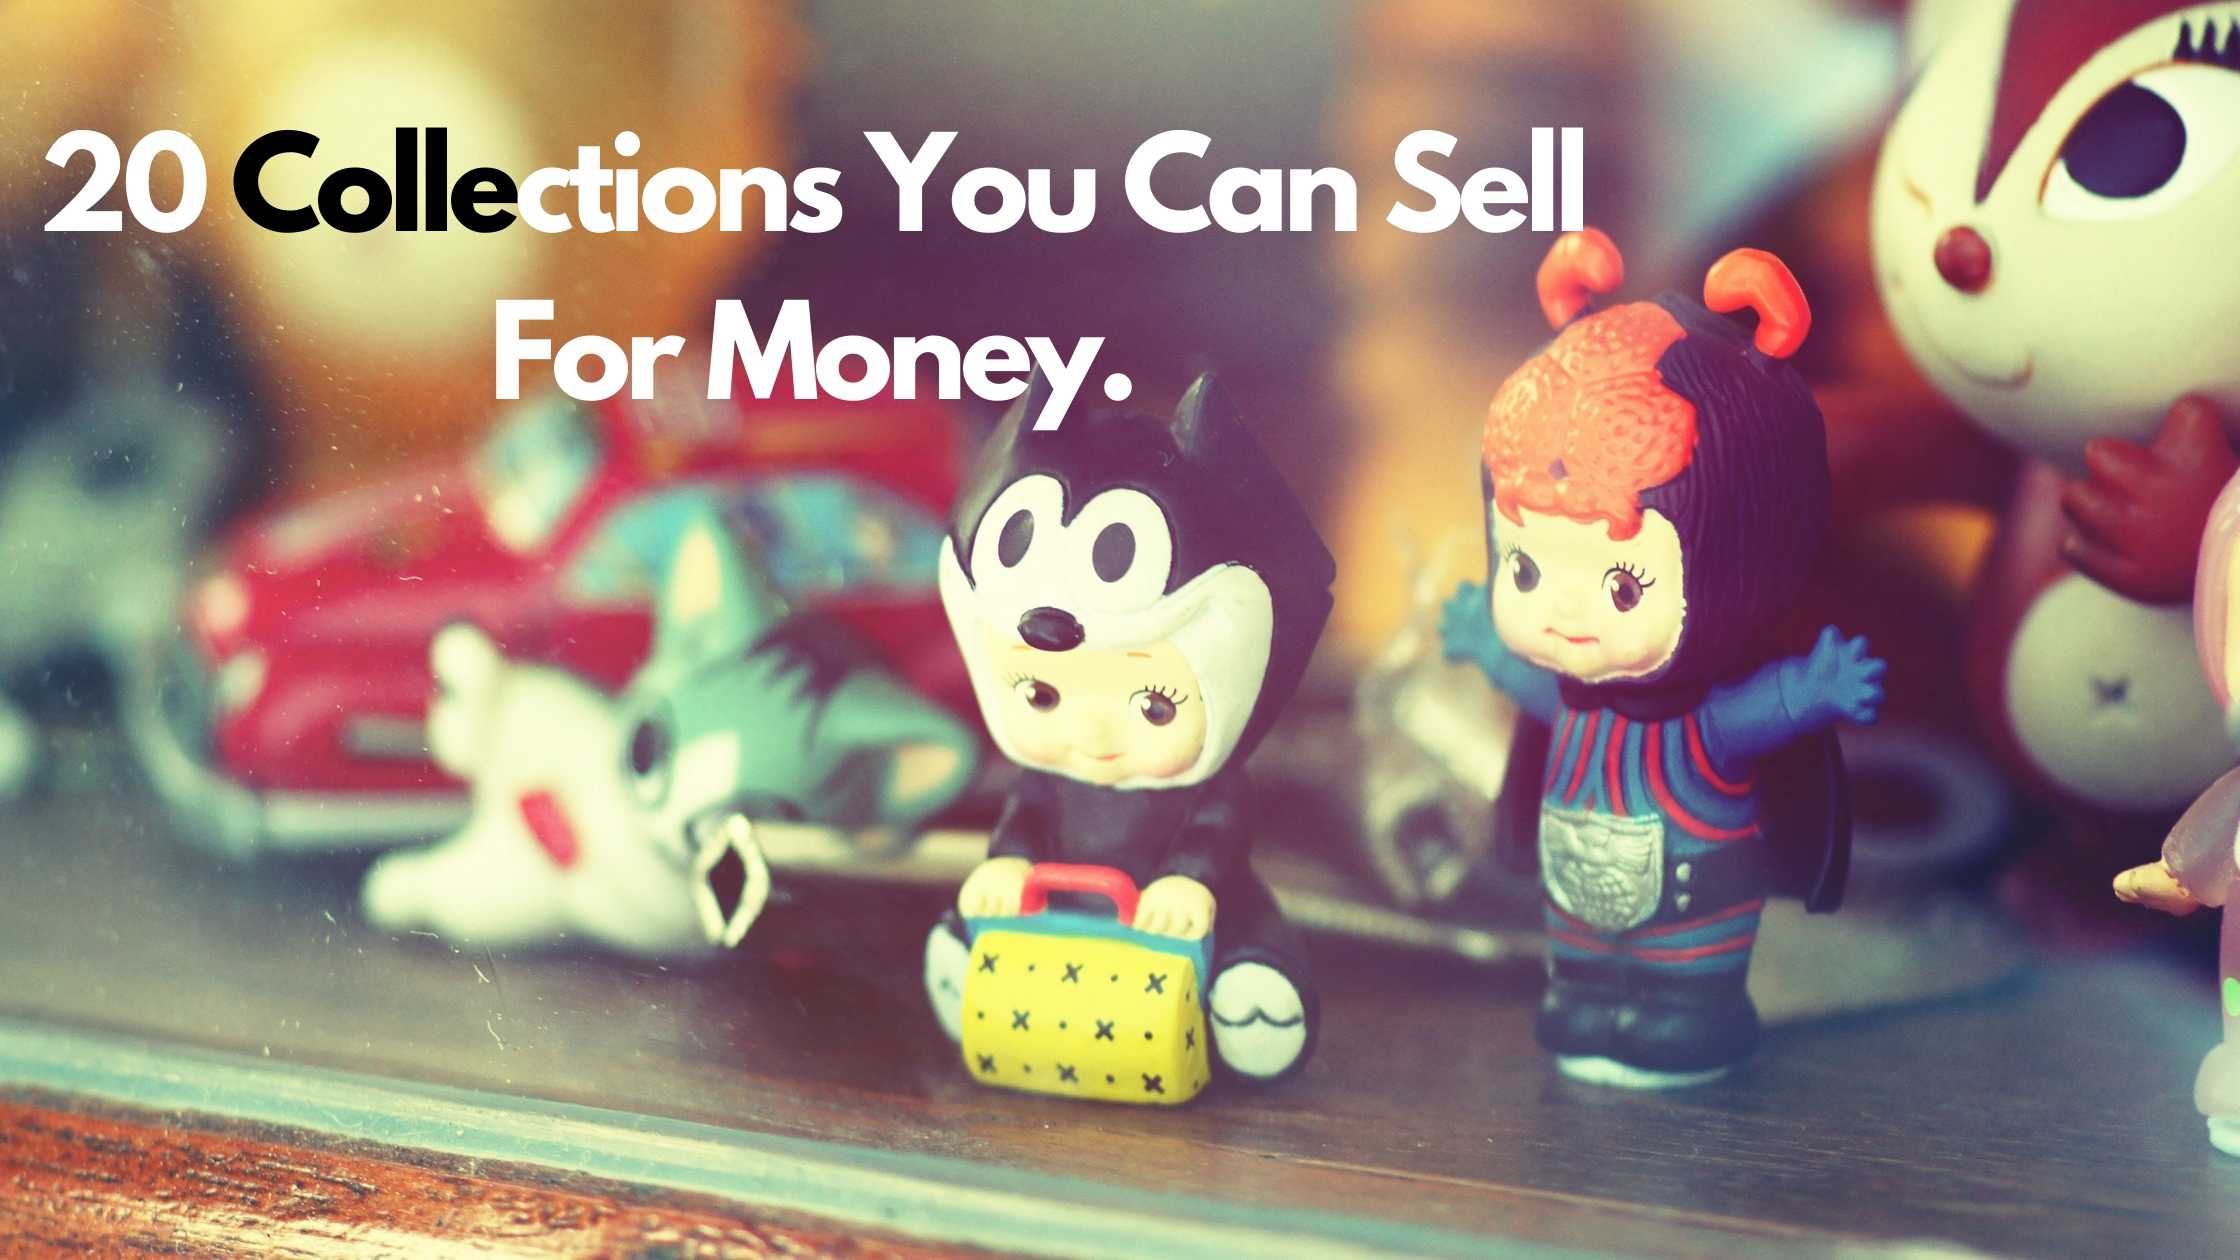 20 Collections You Can Sell For Money